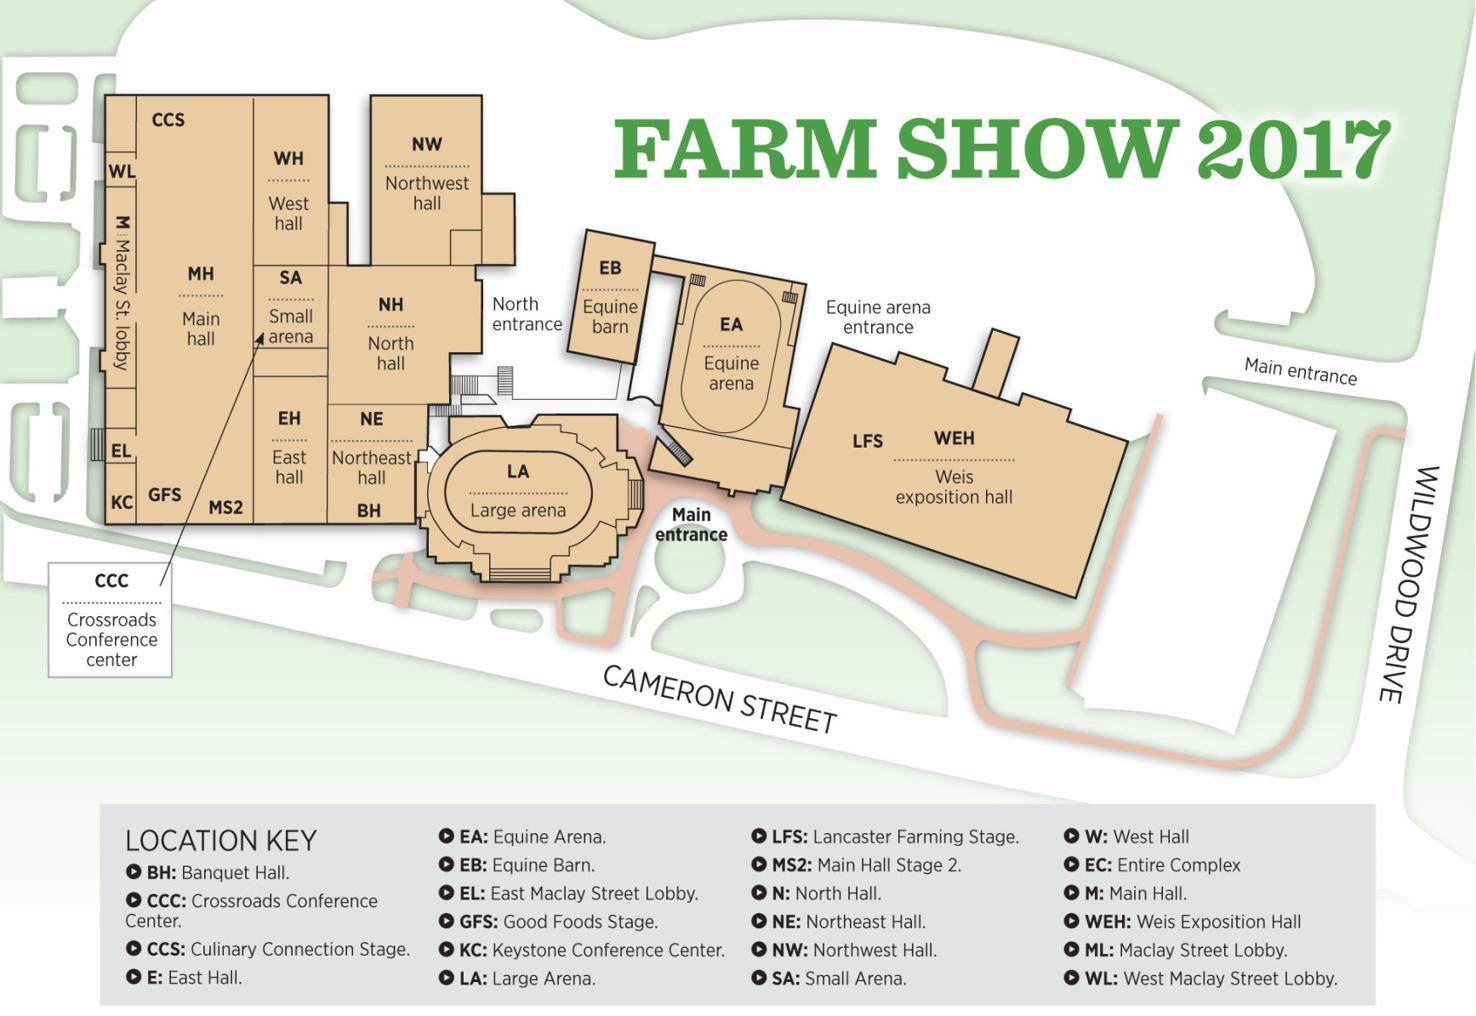 Pennsylvania Farm Show 2017 Here's the schedule and results